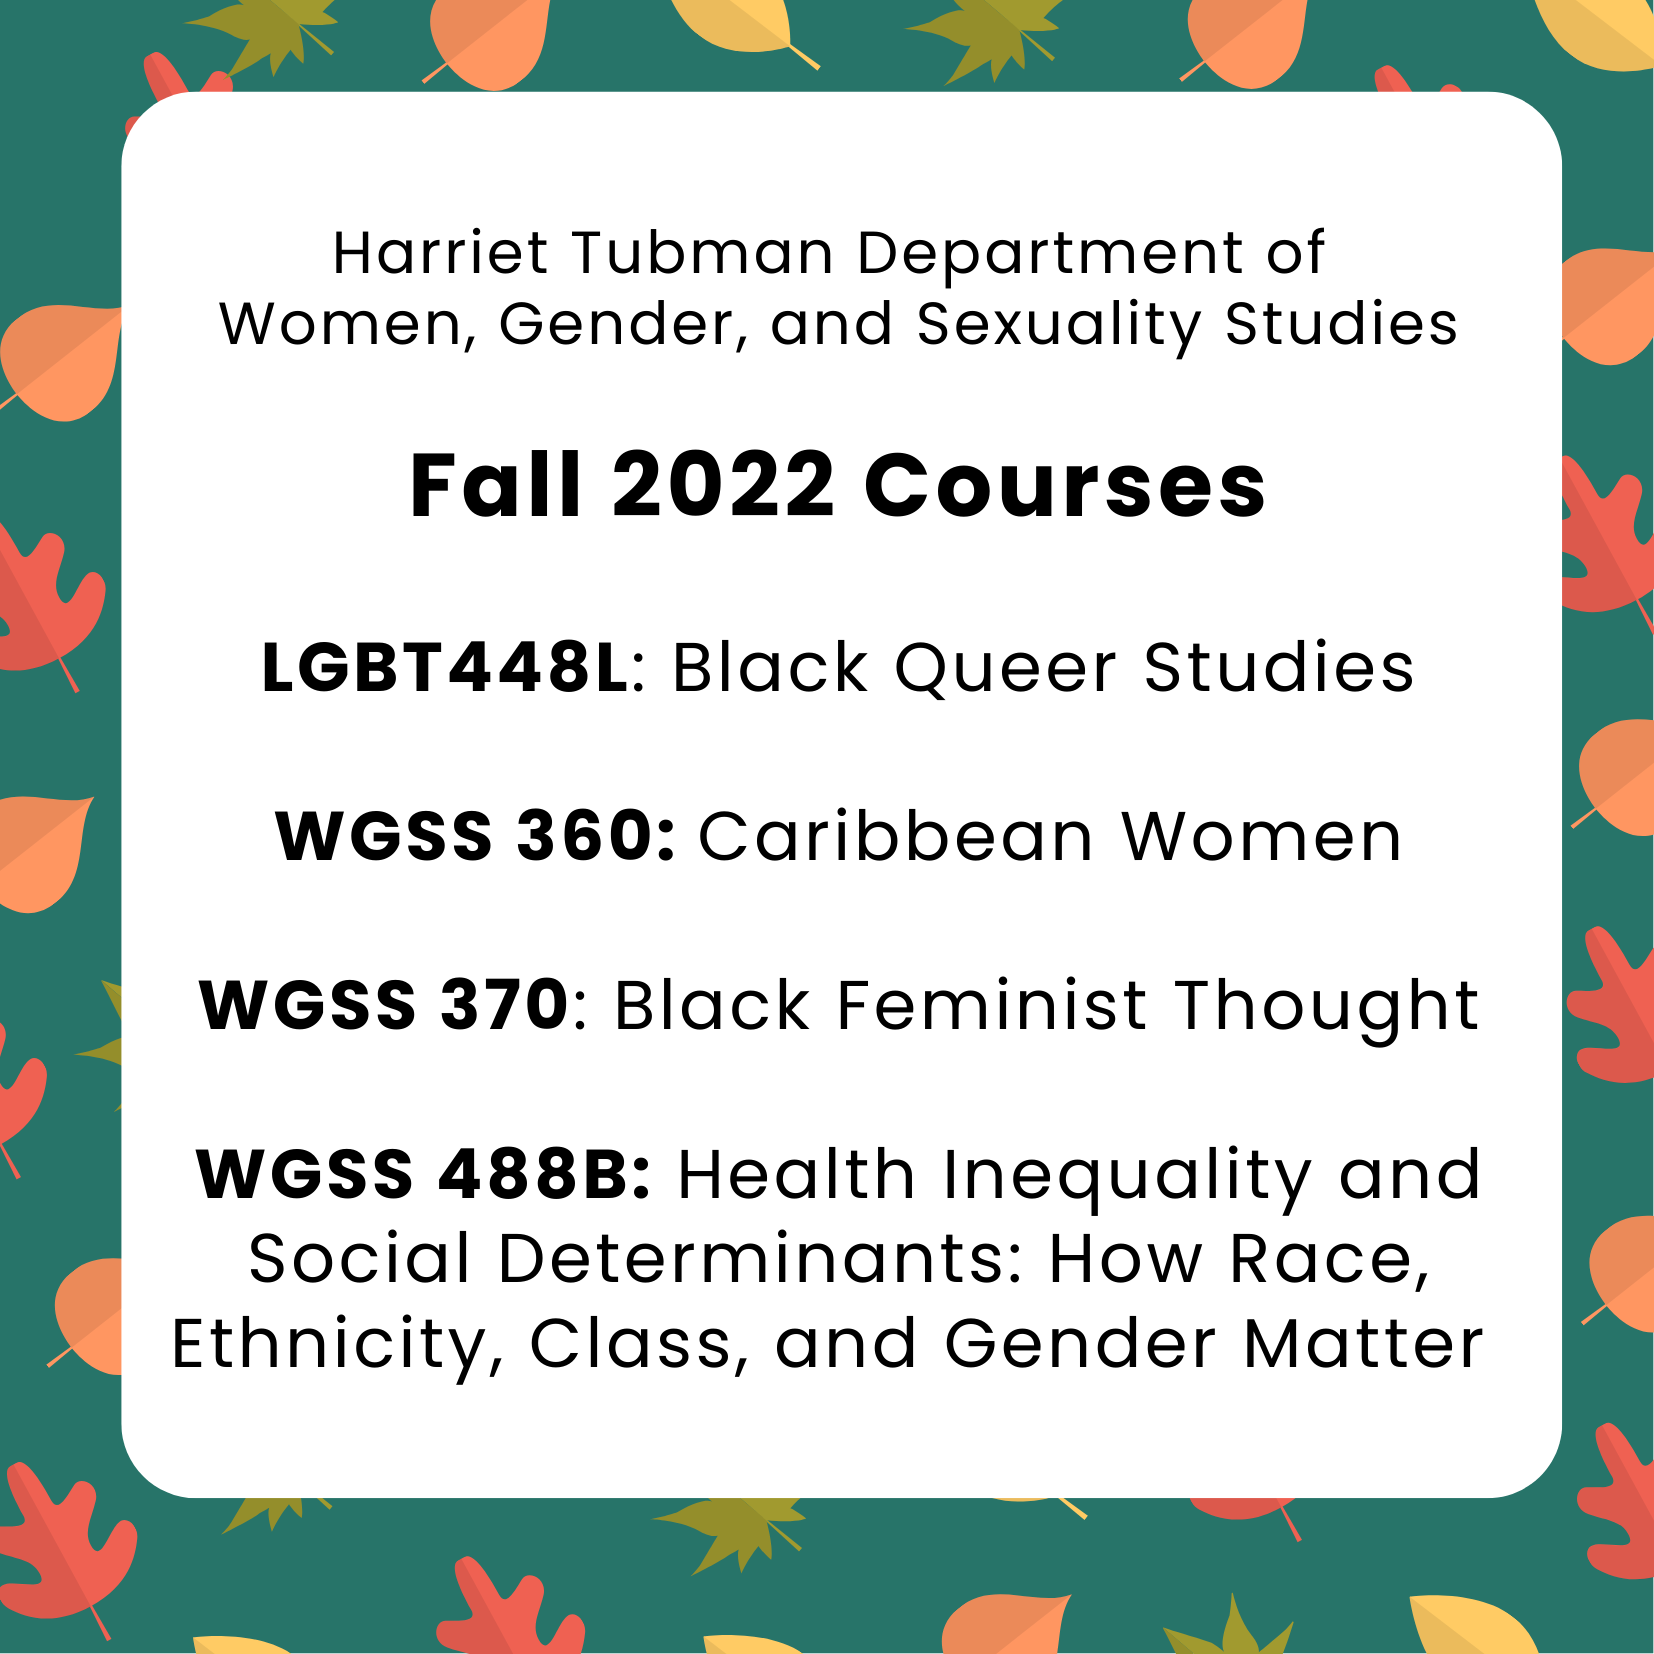 Image of autumn leaves on a green background with text describing Fall 2022 courses from WGSS 